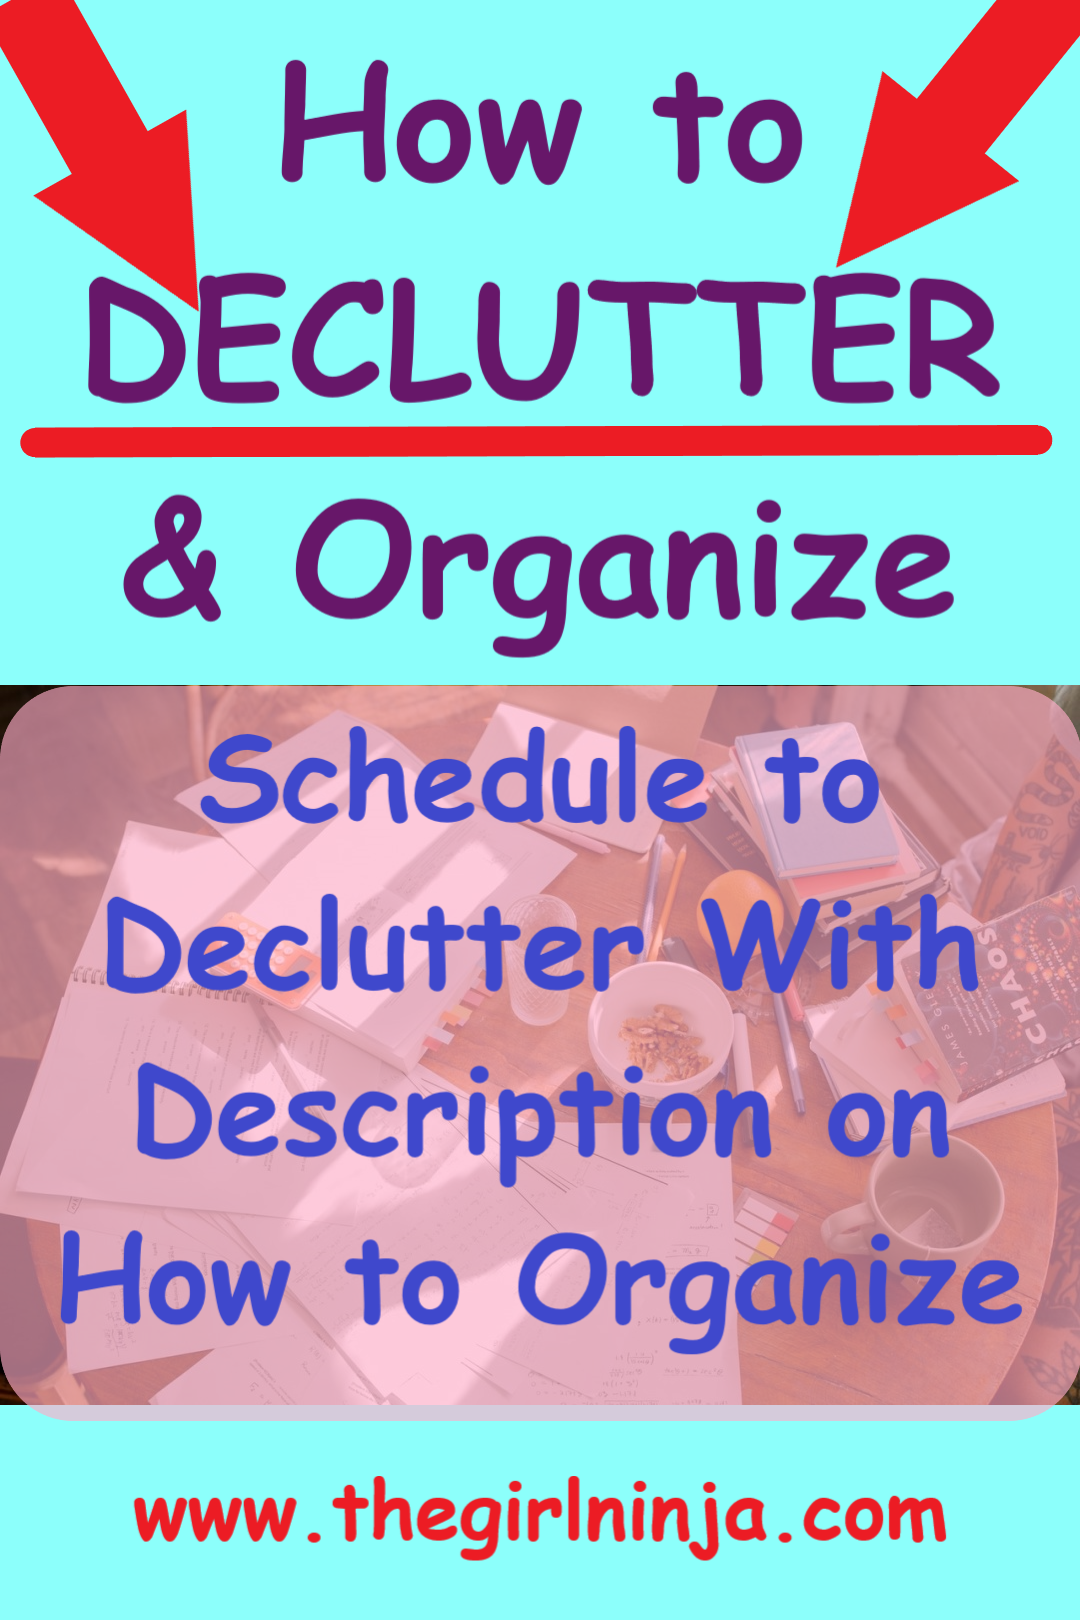 Large purple text that reads How to DECLUTTER & Organize above image of table with scattered papers, books, food, dishes, etc. Over table blue text reads Schedule to Declutter With Description on How to Organize. At bottom center red text reads www.thegirlninja.com